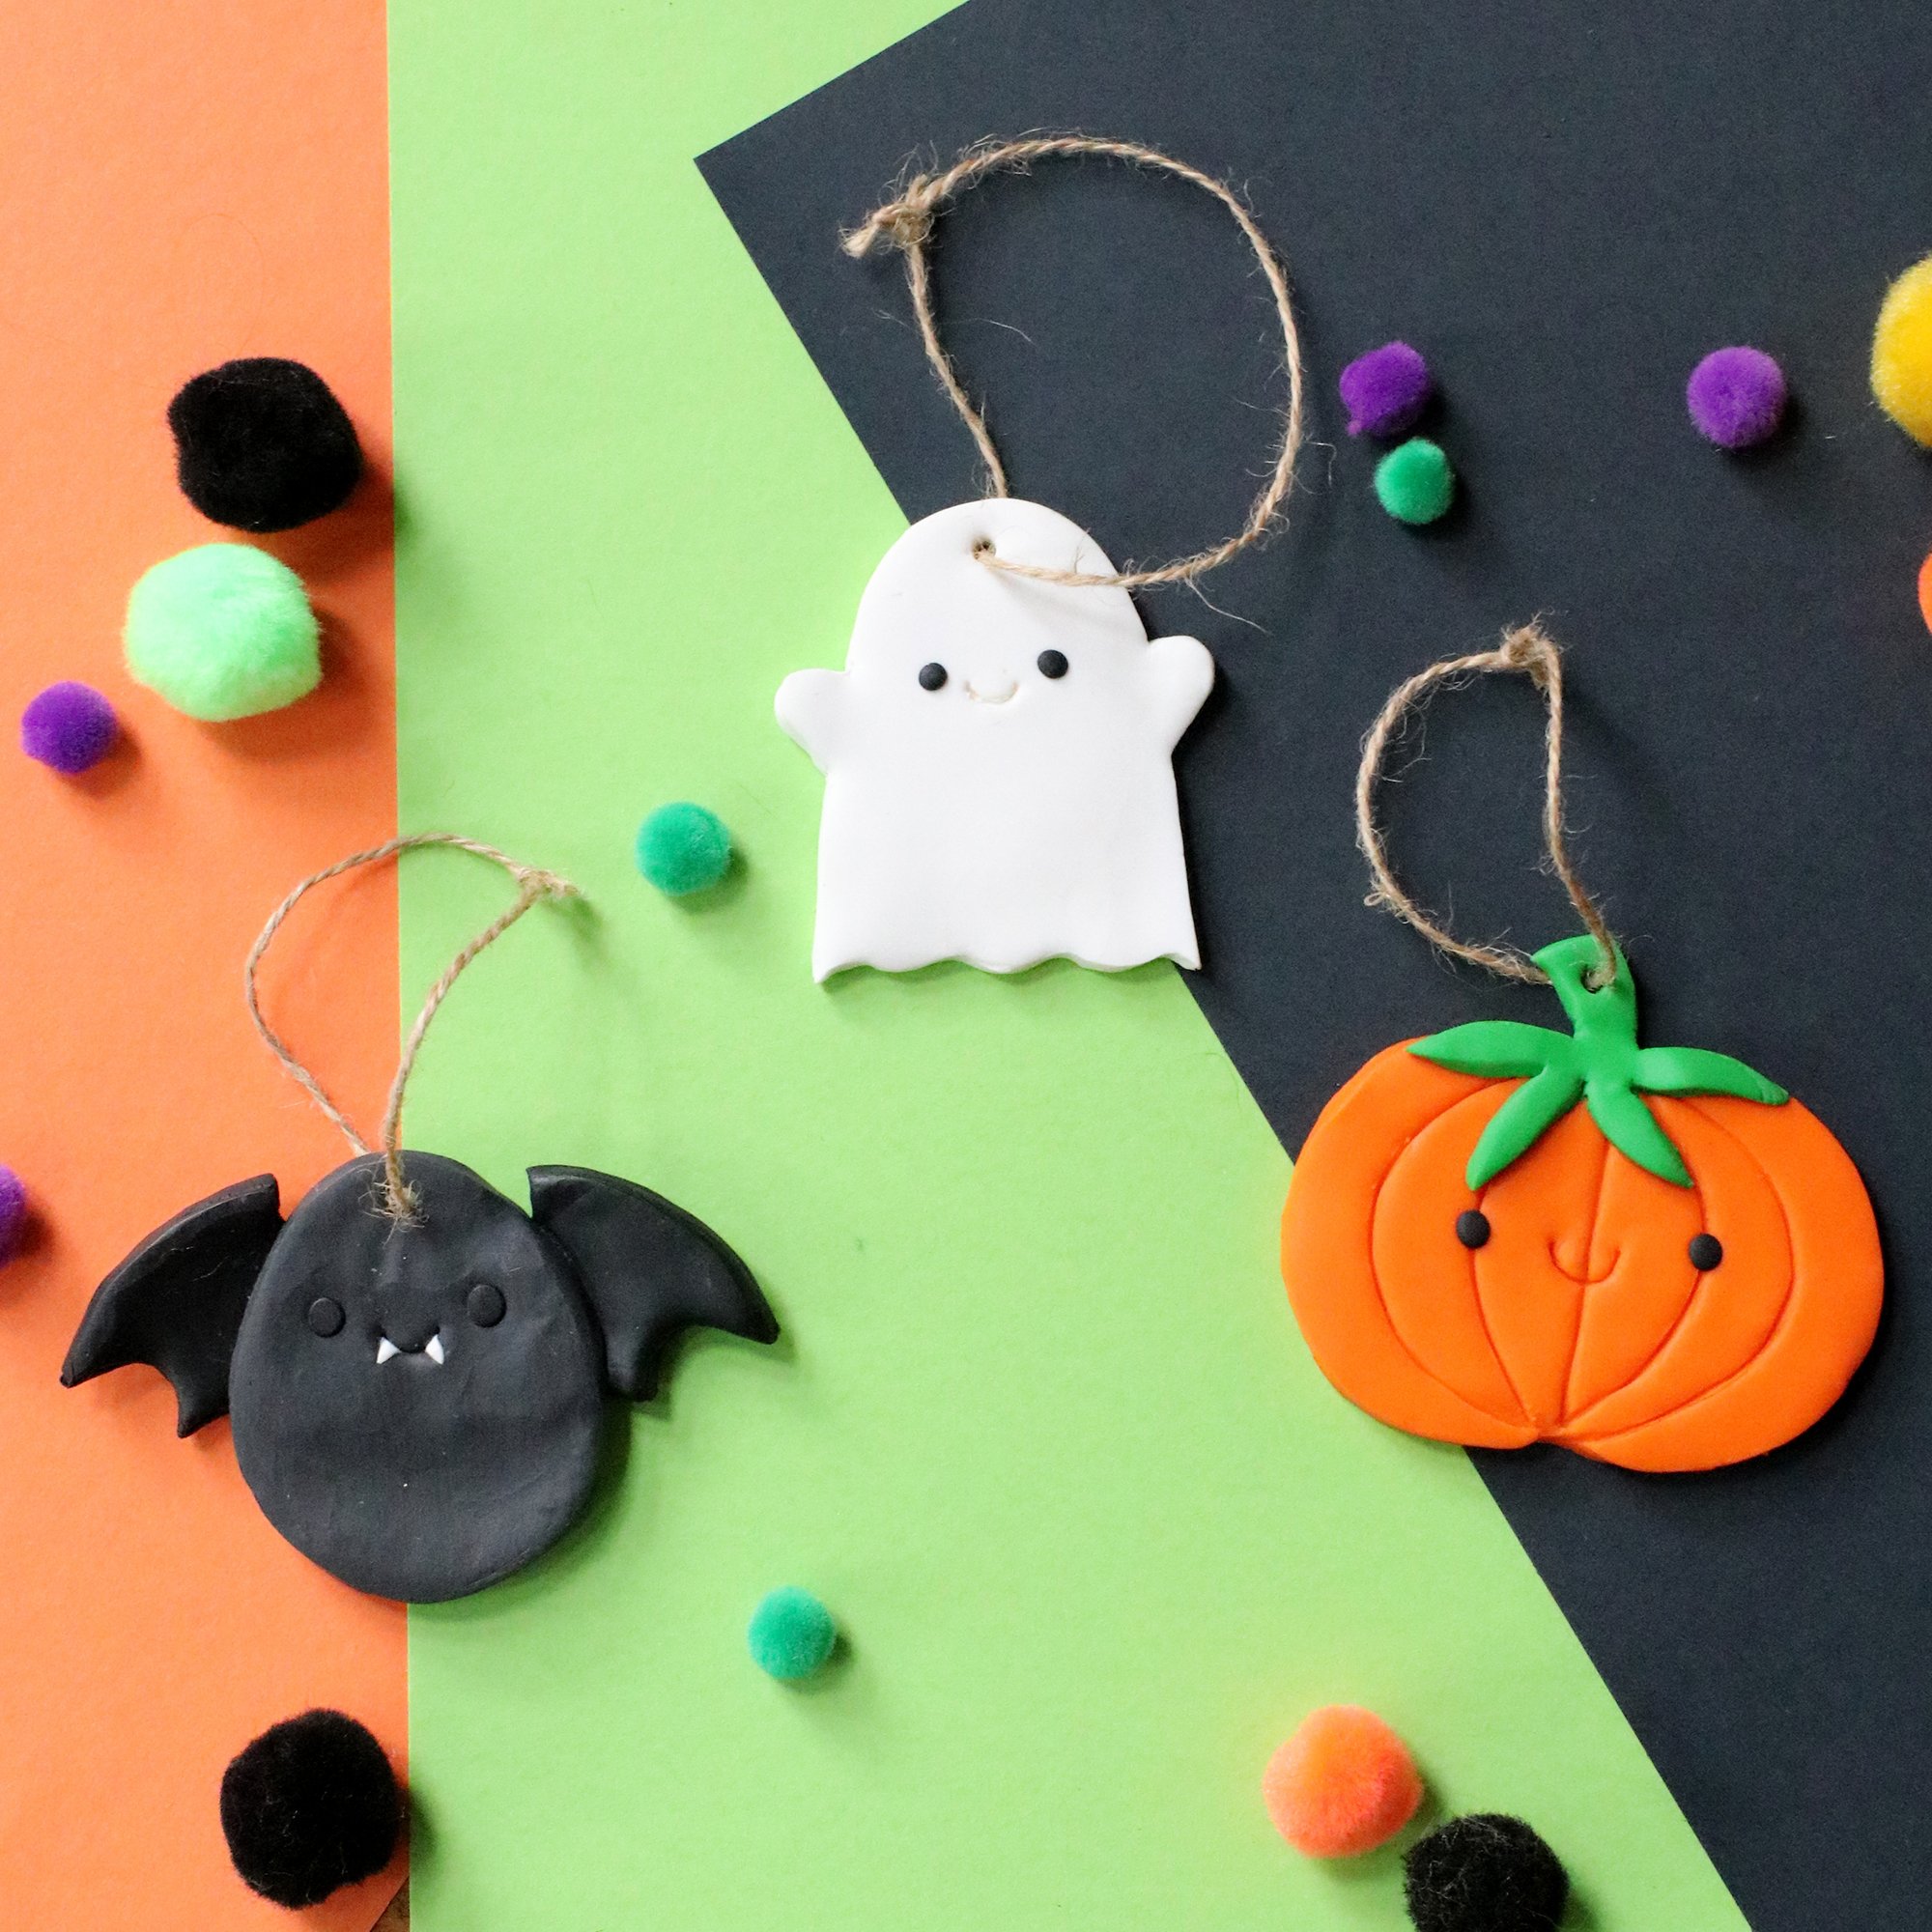 How to Make FIMO Clay Halloween Decorations | Hobbycraft